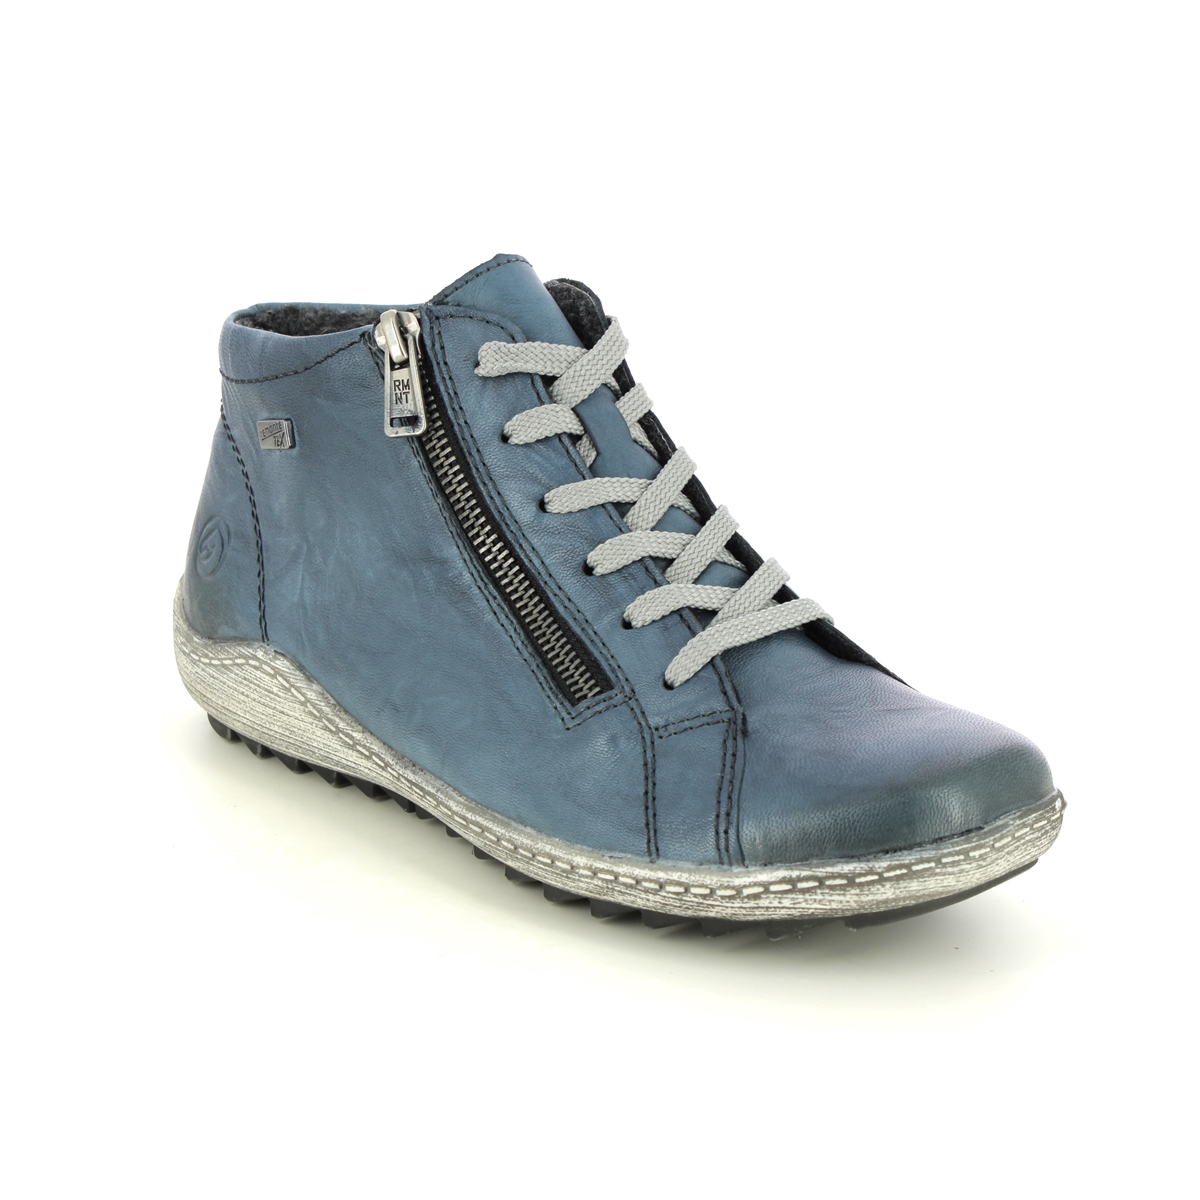 Remonte Zigzip Tex Blue Leather Womens Hi Tops R1470-16 In Size 42 In Plain Blue Leather